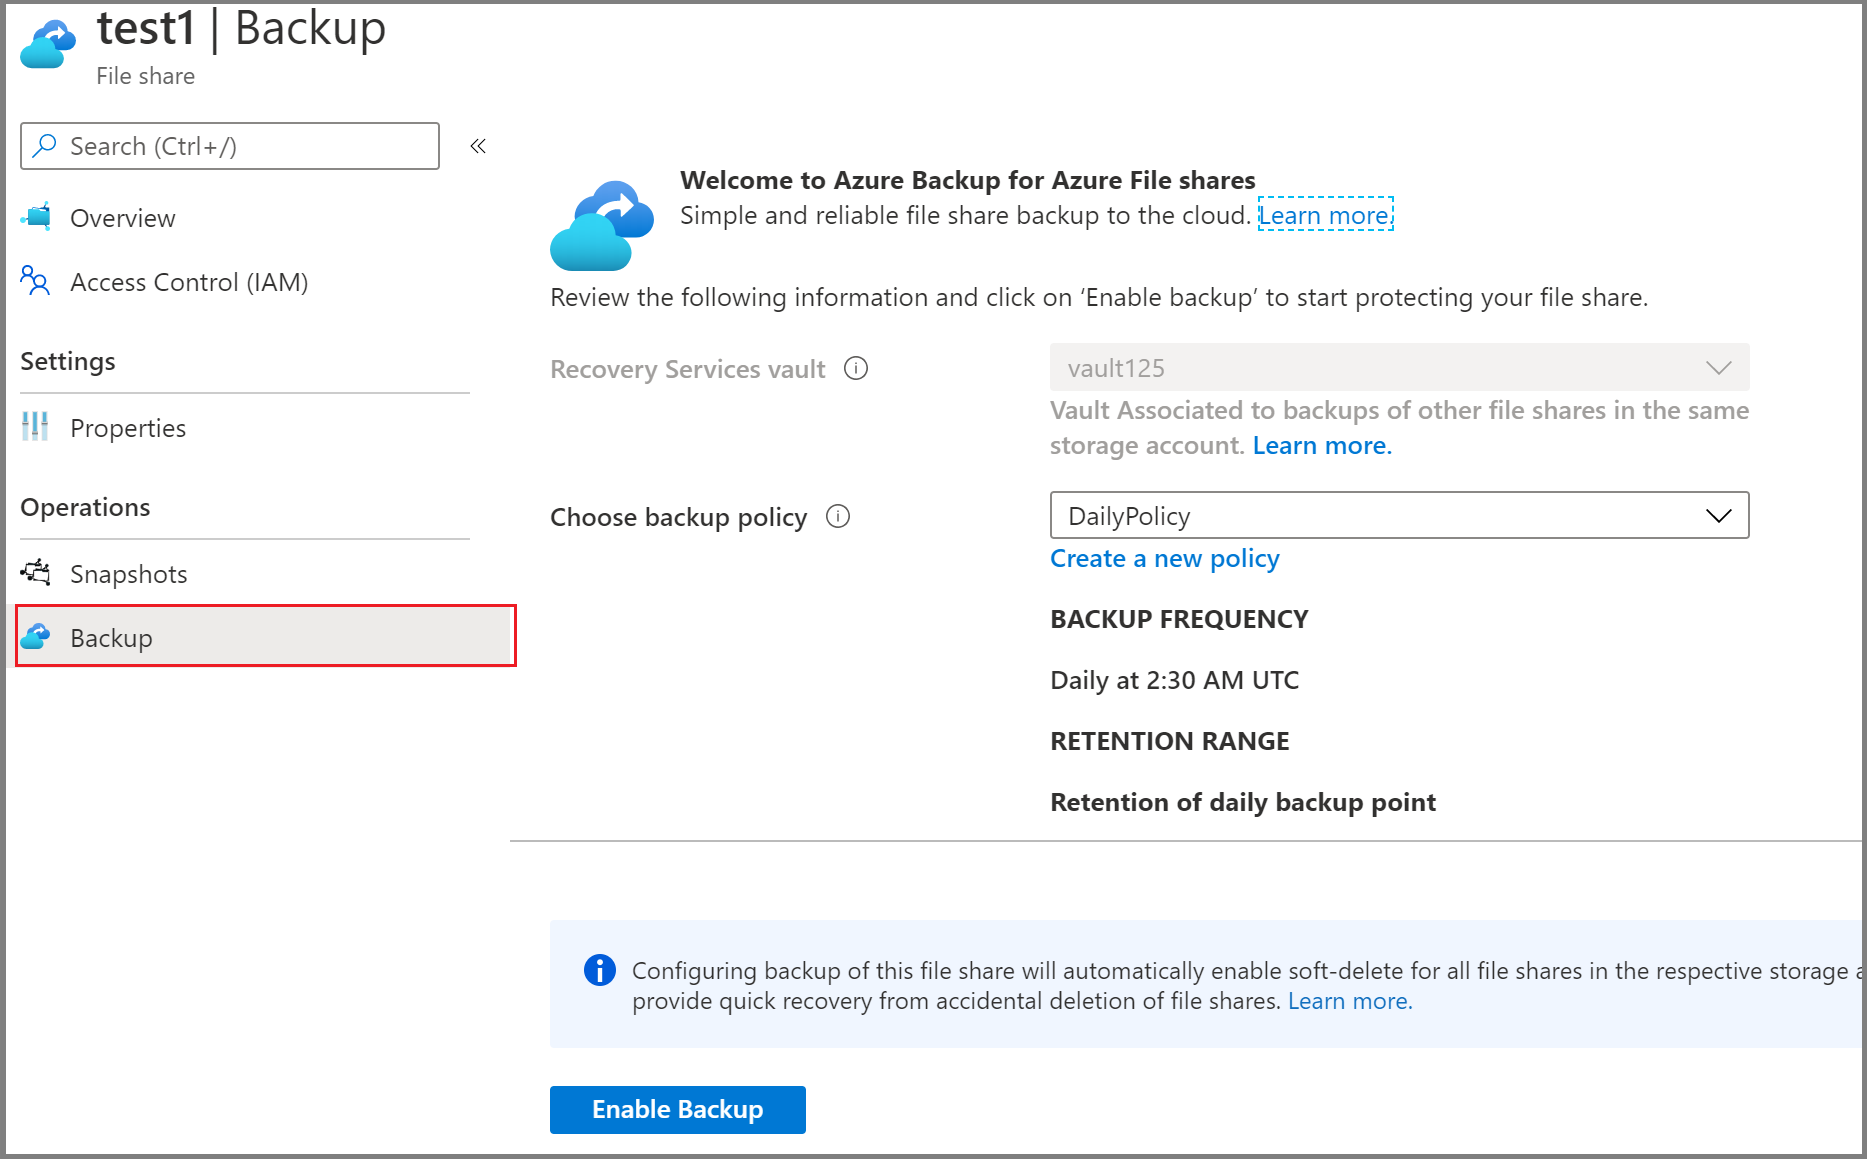 Screenshot shows how to open the Configure backup blade.